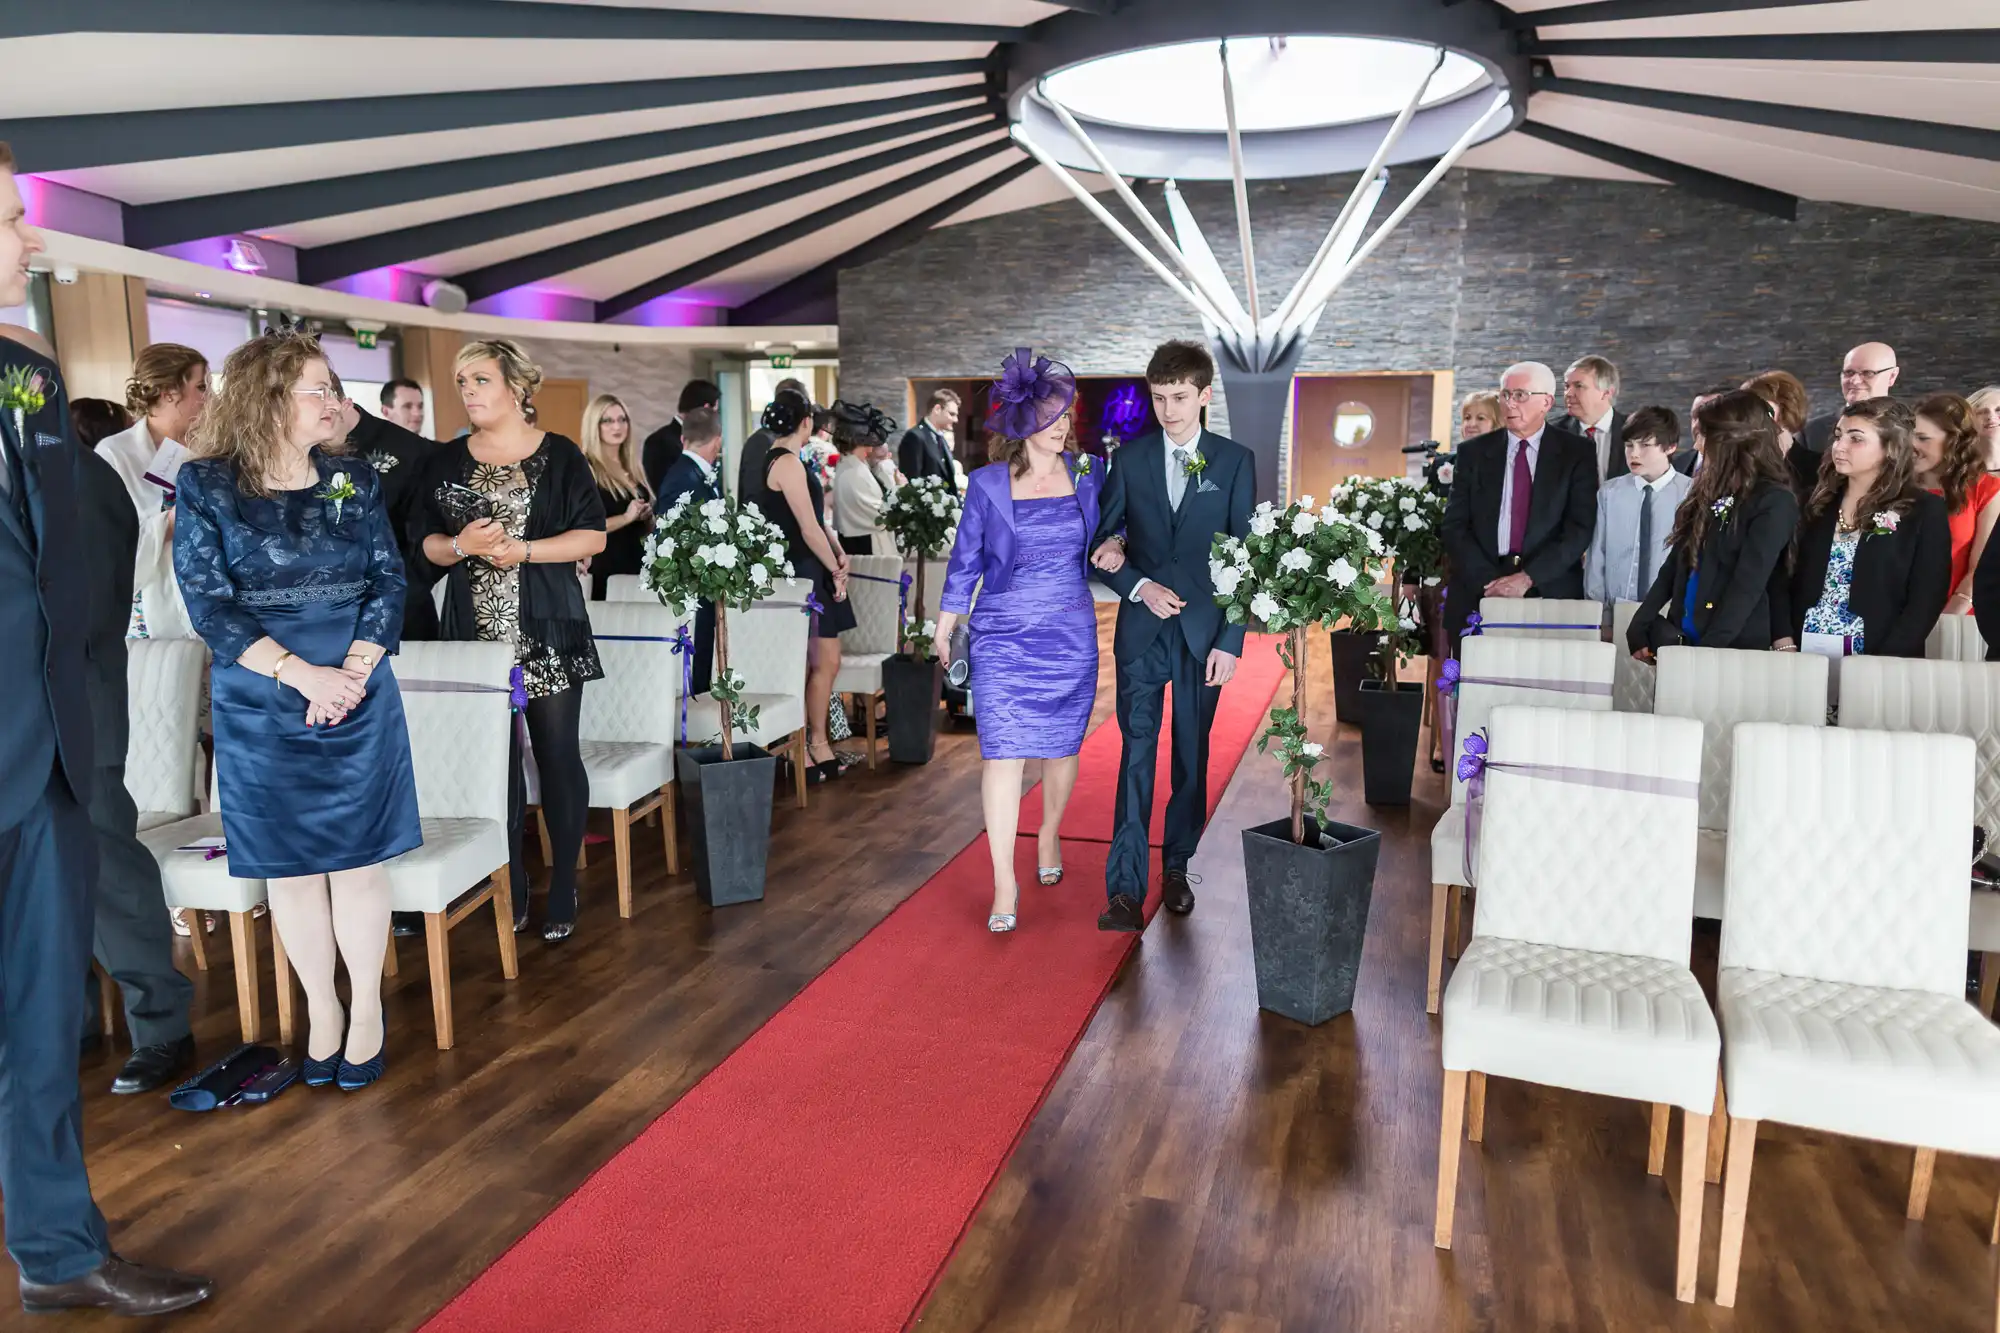 A wedding ceremony in an elegant indoor venue with guests standing and a couple walking down the aisle, led by a woman in a purple hat.